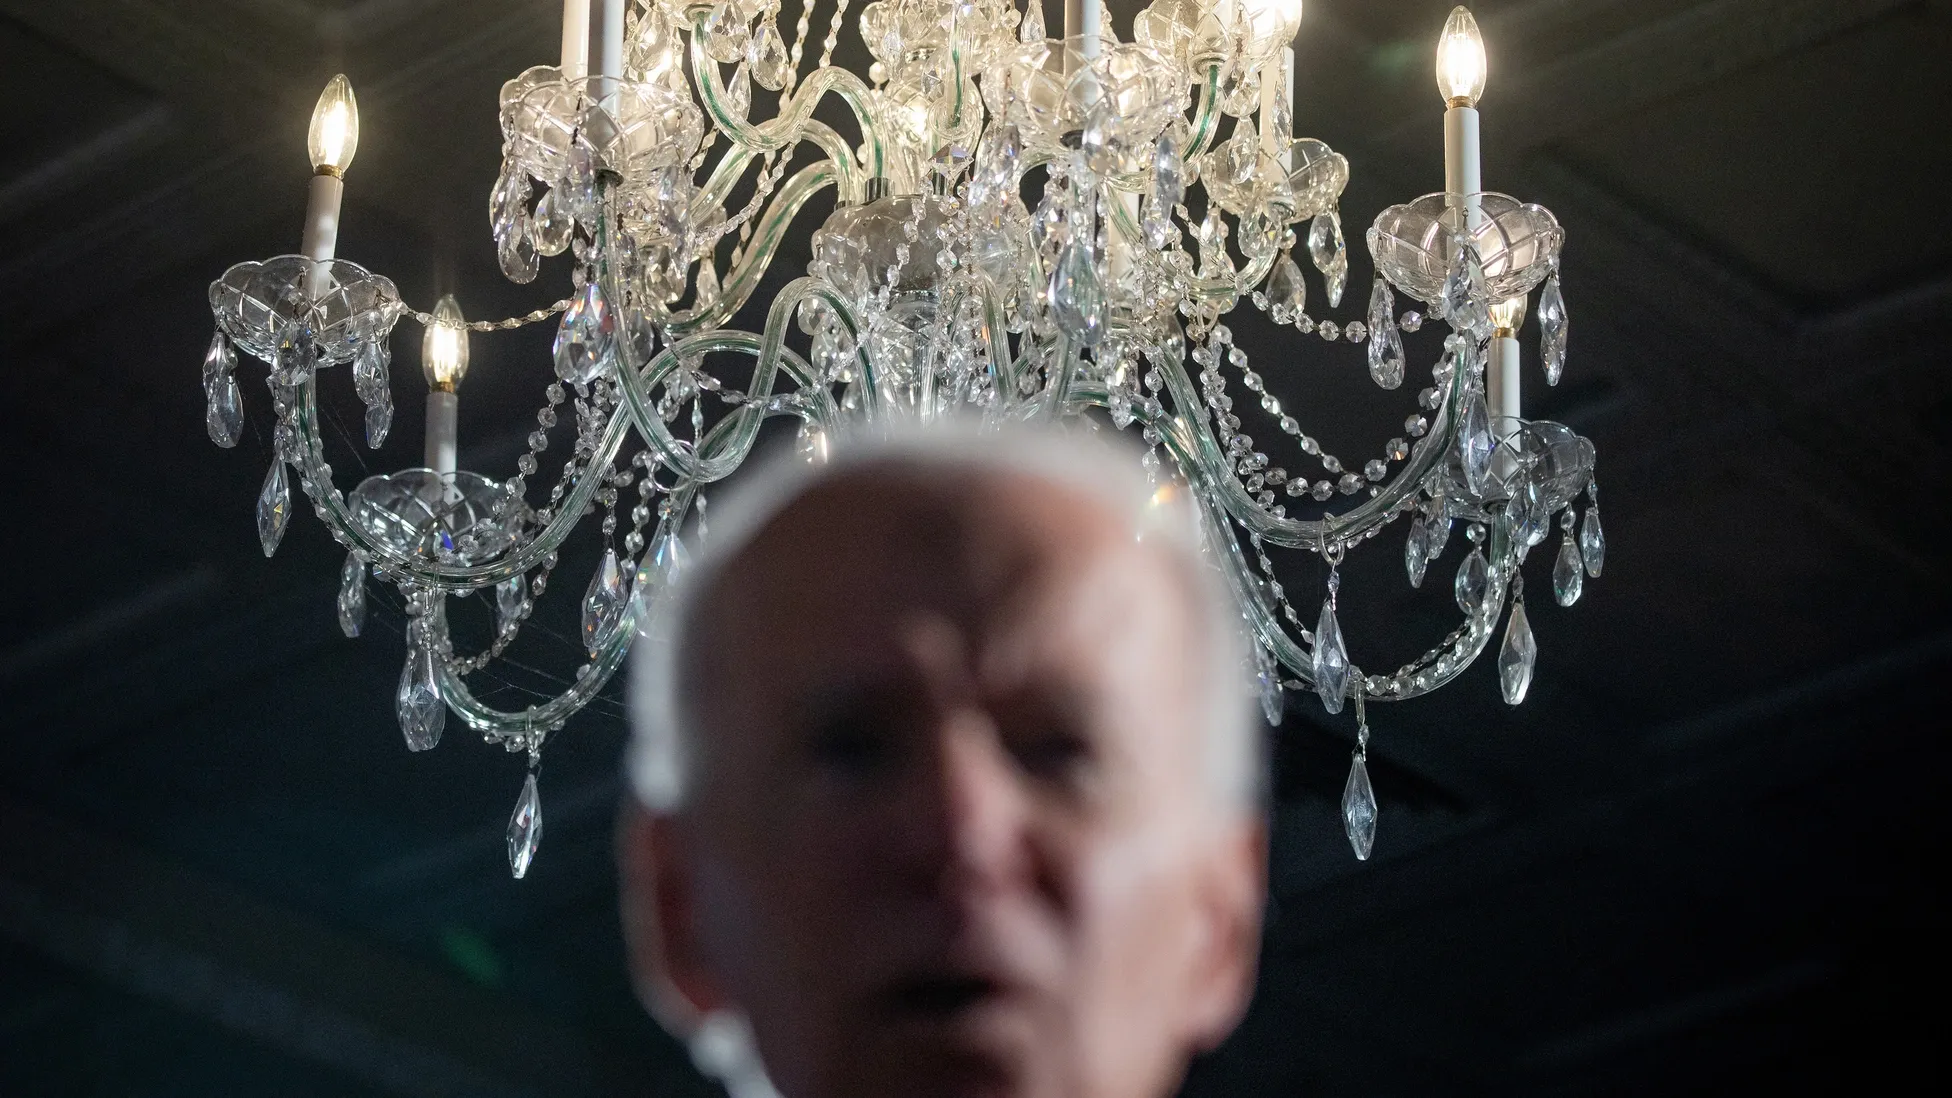 Throwing Shade: The Disturbing Visual Fallout From the Special Counsel’s Attack on Biden’s Competency